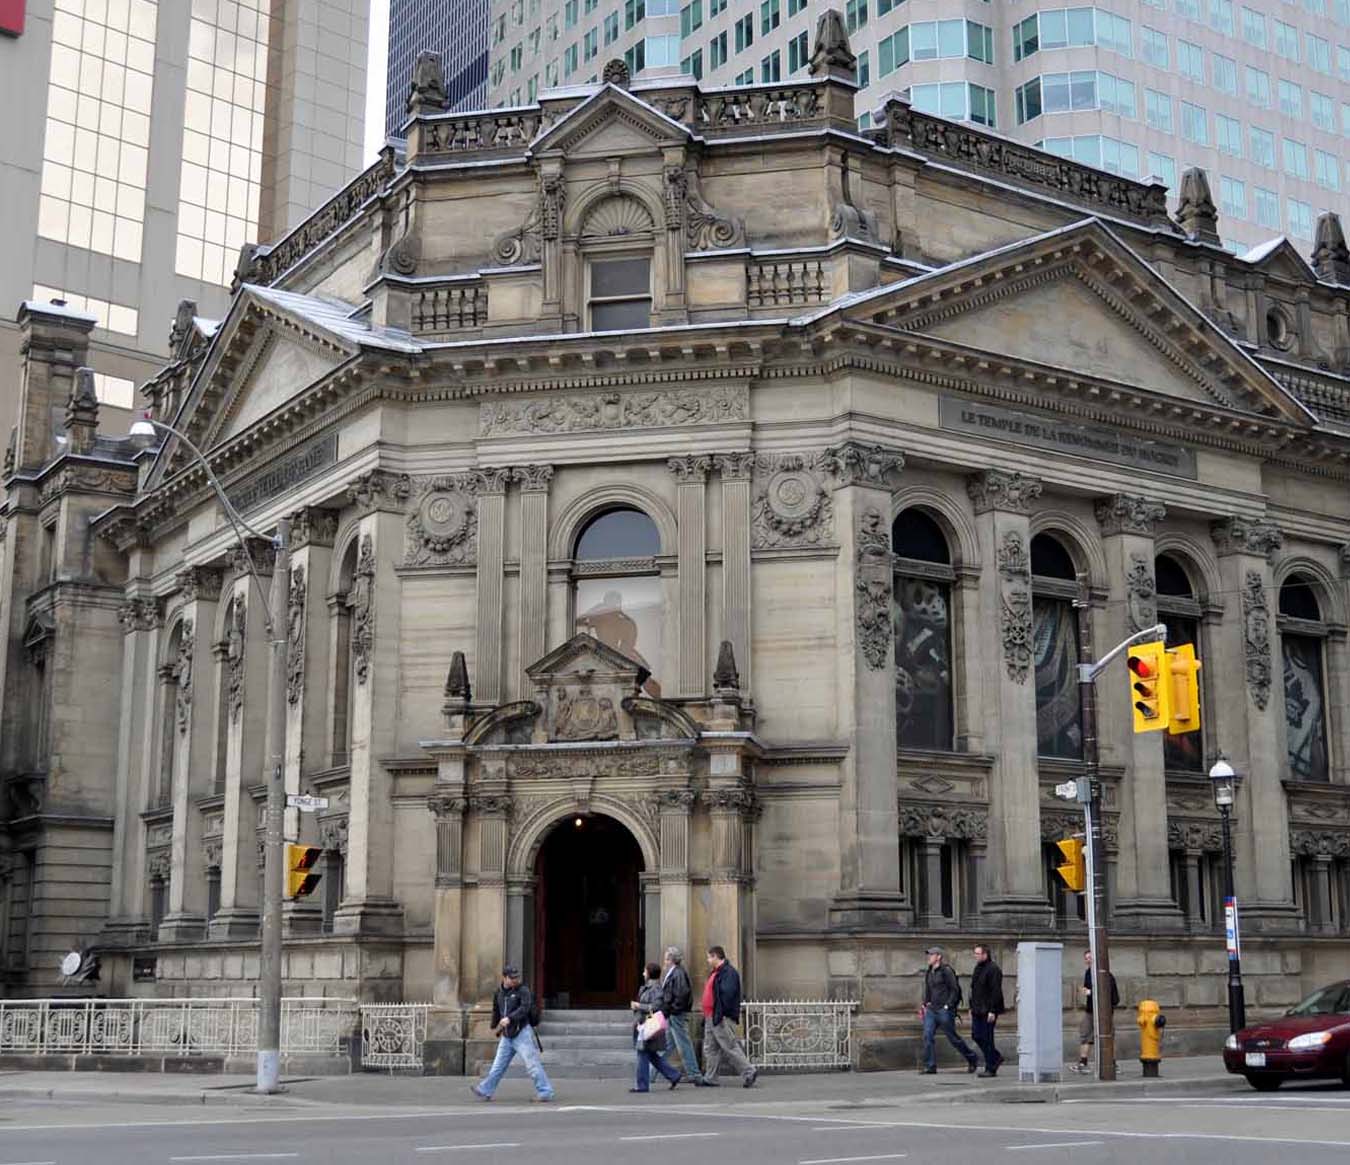 Hockey Hall of Fame, Toronto - Exhibits, Photos, Tickets, Time